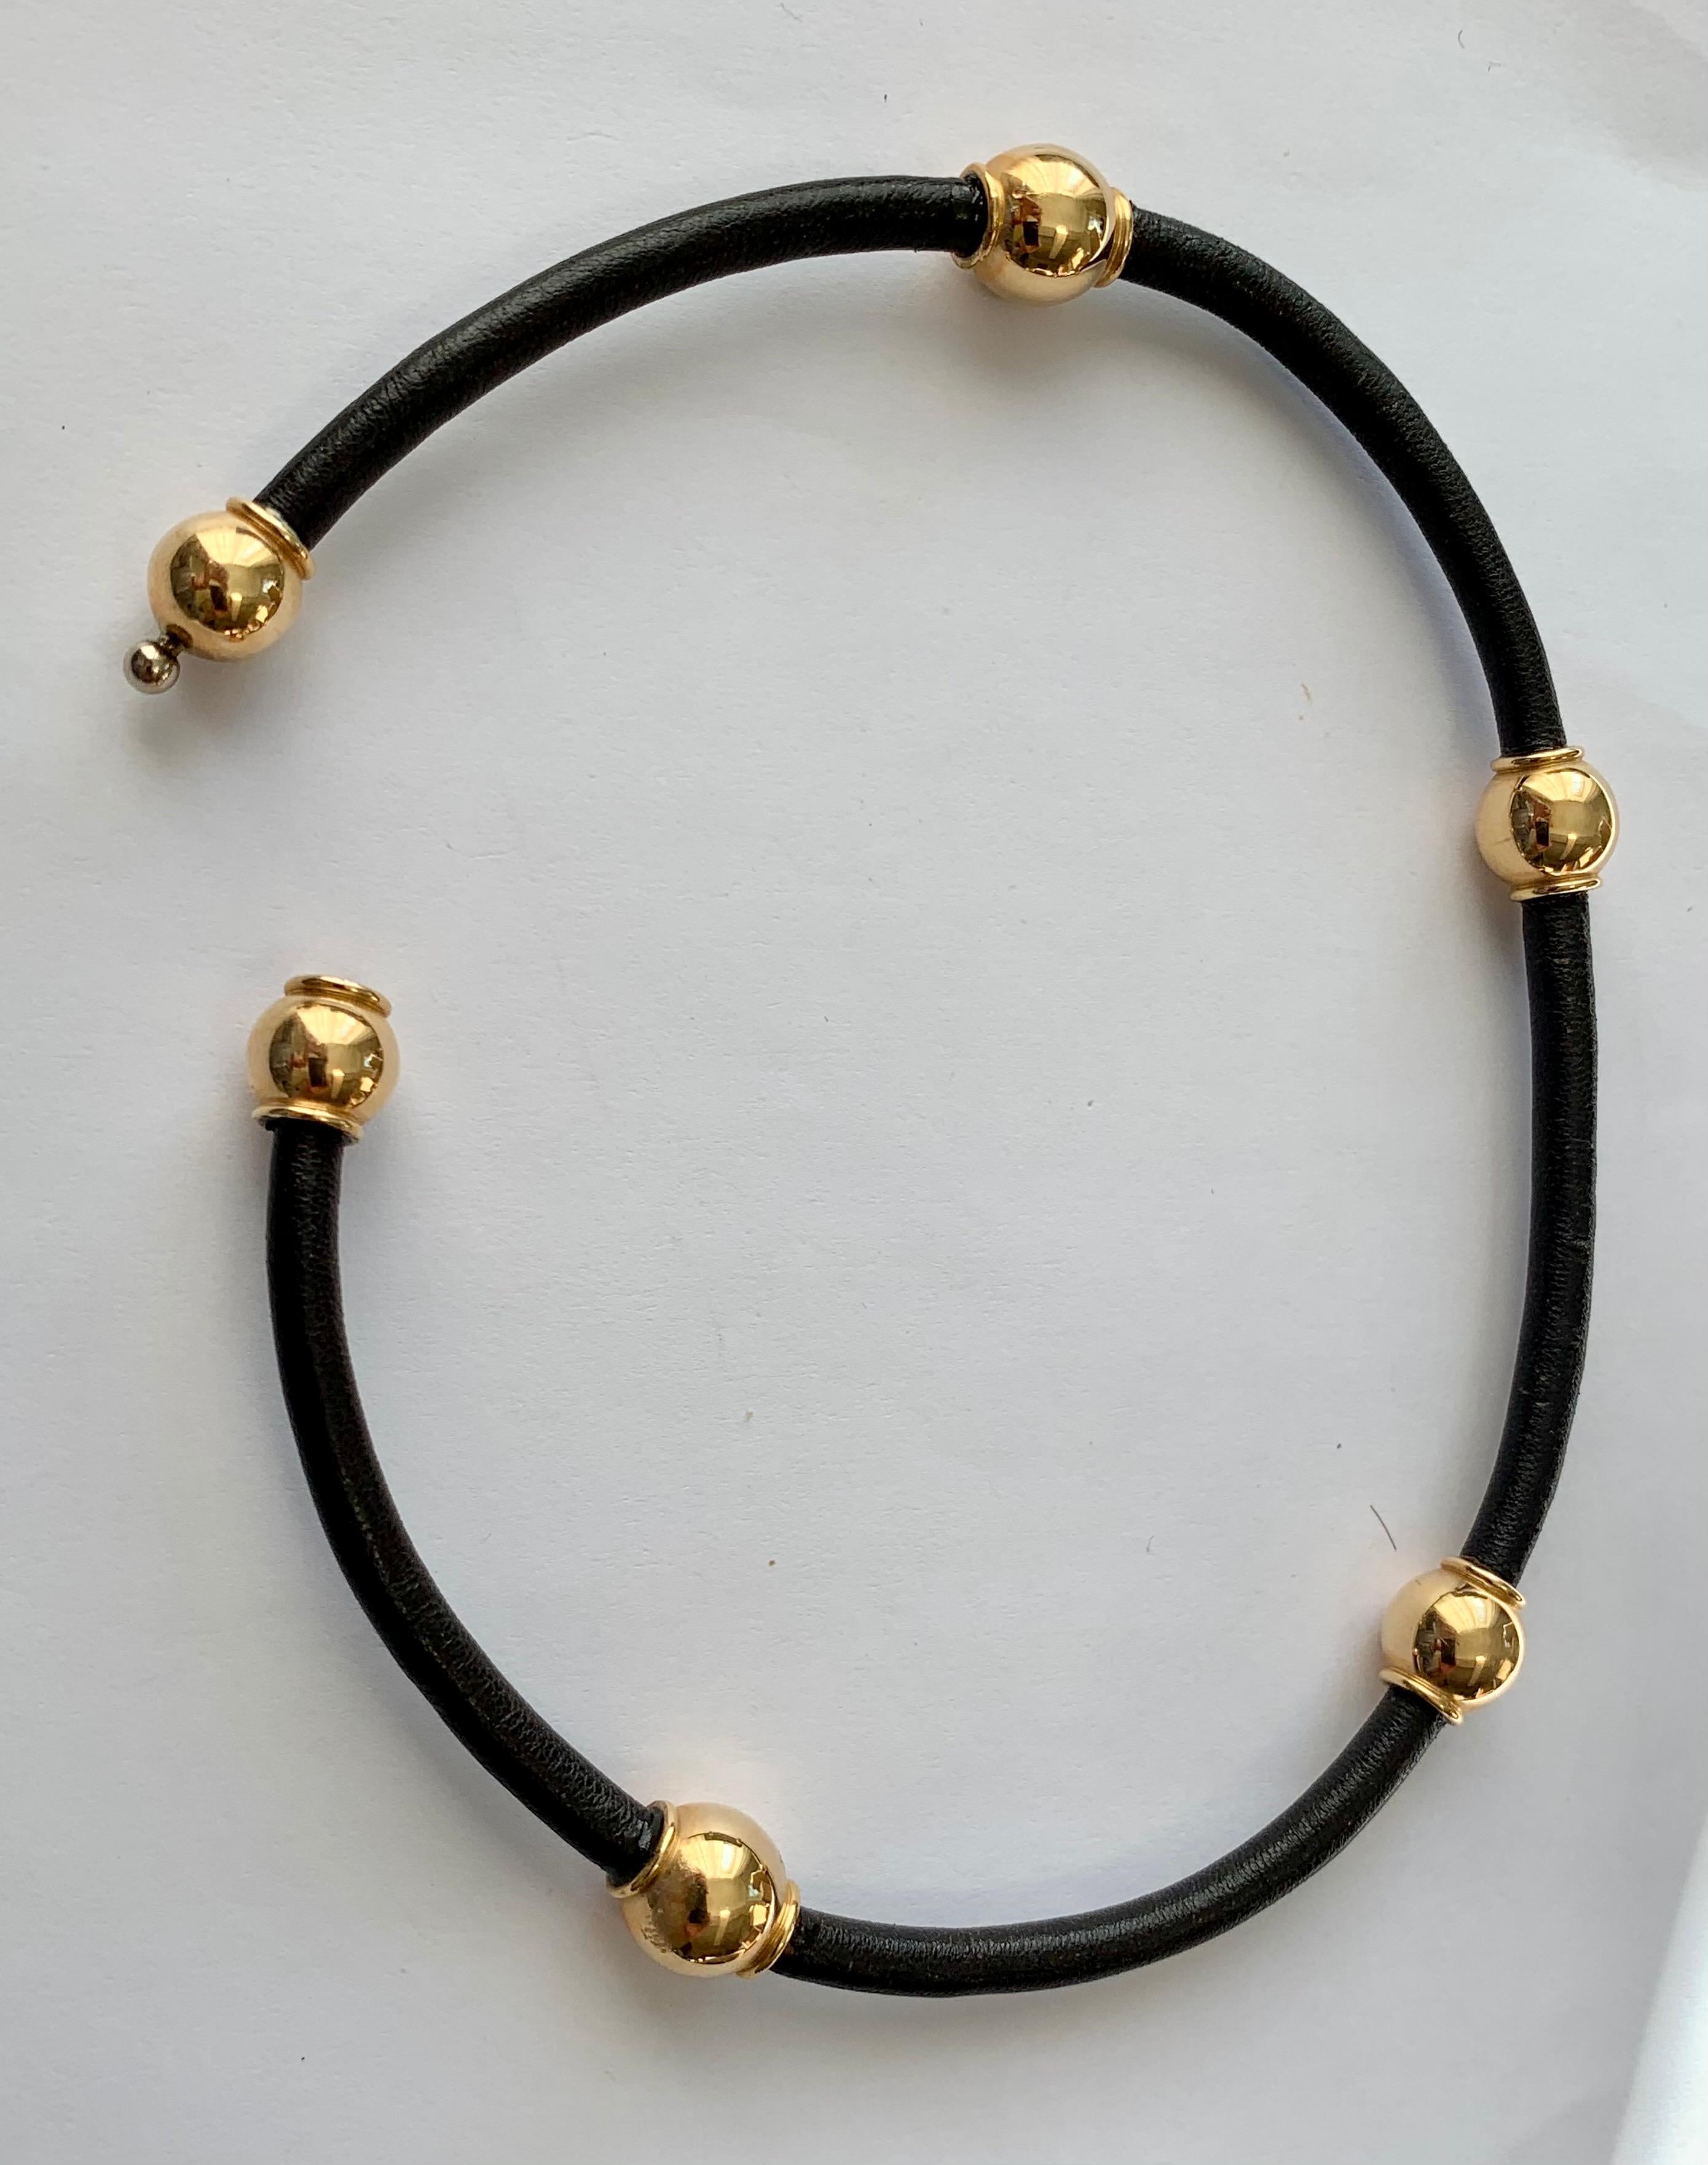 Emerald Cut 1960 Vintage Leather Necklace and Bracelet with Citrine by Paul Binder Zurich For Sale